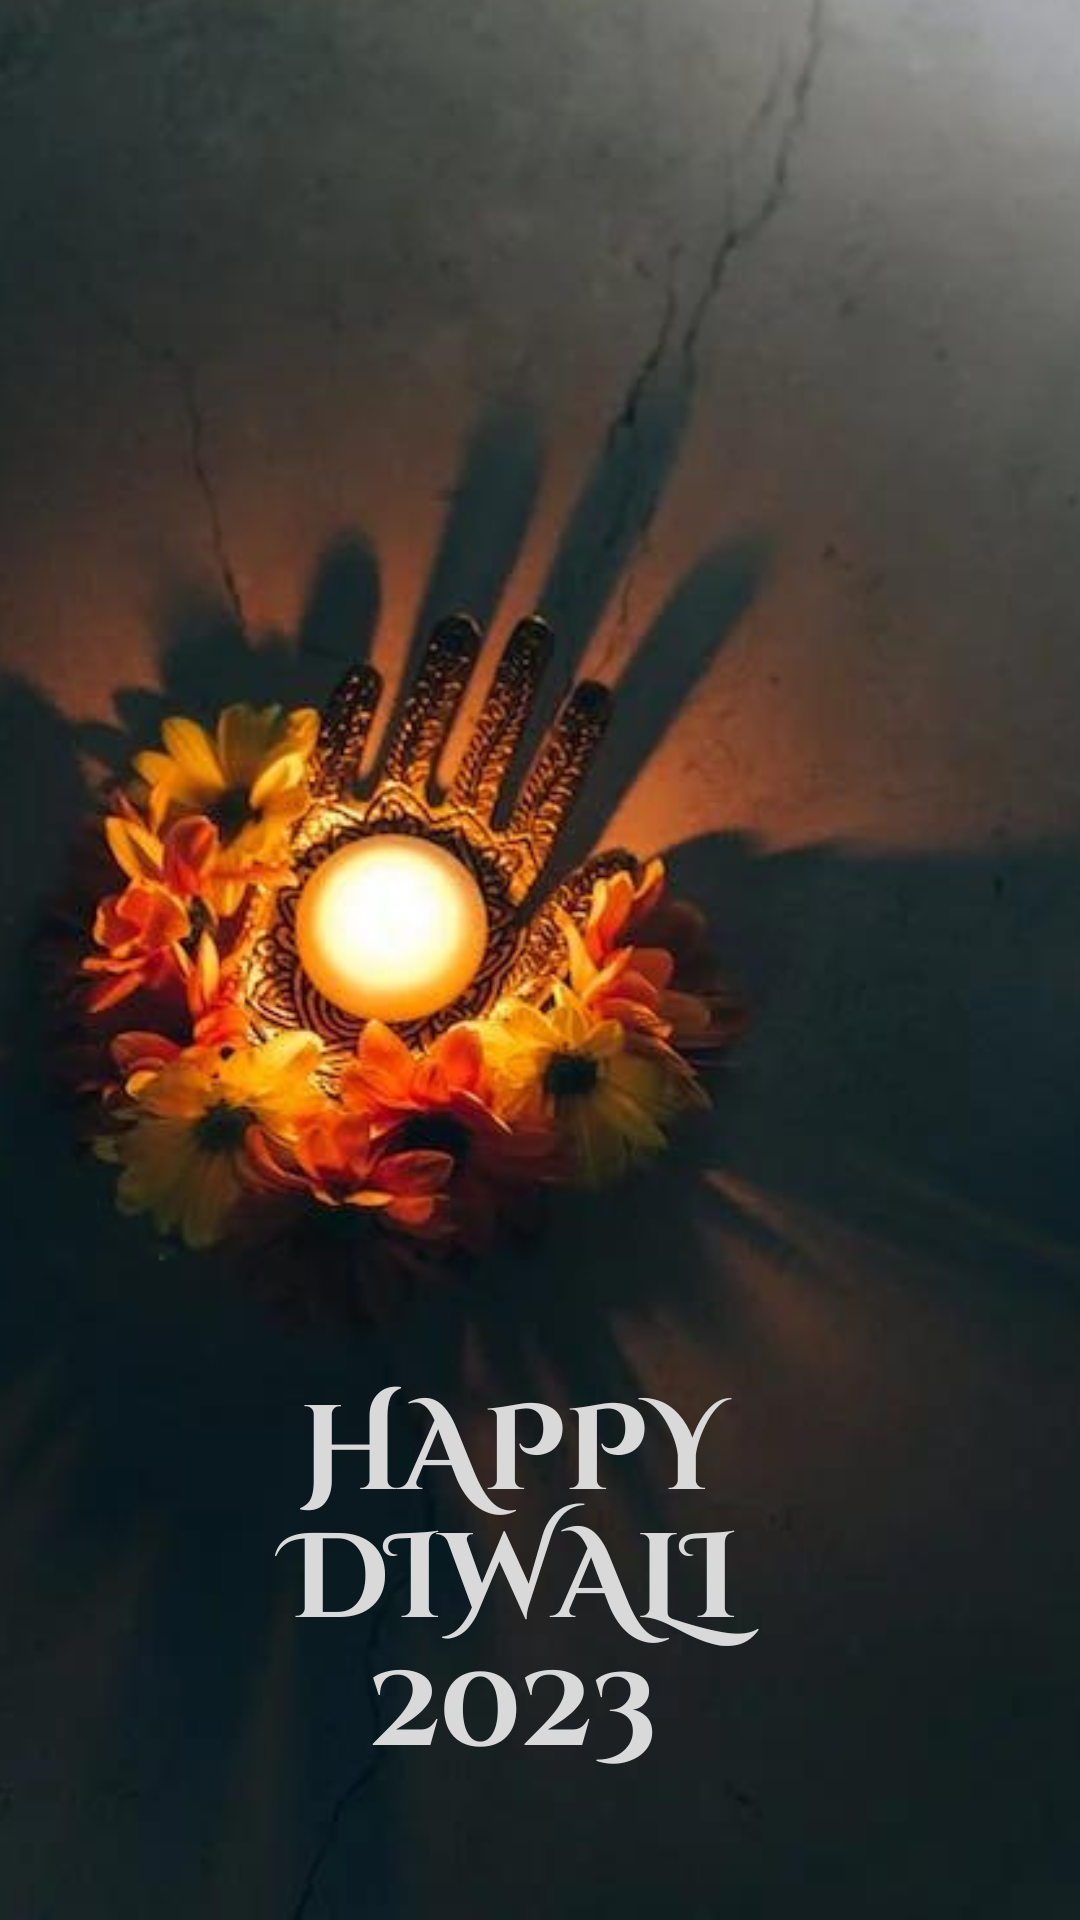 #{"id":221,"_id":"61f3f785e0f744570541c10c","name":"happy-diwali-status","count":9,"data":"{\"_id\":{\"$oid\":\"61f3f785e0f744570541c10c\"},\"id\":\"195\",\"name\":\"happy-diwali-status\",\"created_at\":\"2020-11-07-17:56:11\",\"updated_at\":\"2020-11-07-17:56:11\",\"updatedAt\":{\"$date\":\"2022-01-28T14:33:44.889Z\"},\"count\":9}","deleted_at":null,"created_at":"2020-11-07T05:56:11.000000Z","updated_at":"2020-11-07T05:56:11.000000Z","merge_with":null,"pivot":{"taggable_id":2385,"tag_id":221,"taggable_type":"App\\Models\\Status"}}, #{"id":222,"_id":"61f3f785e0f744570541c10d","name":"diwali-wishes","count":35,"data":"{\"_id\":{\"$oid\":\"61f3f785e0f744570541c10d\"},\"id\":\"196\",\"name\":\"diwali-wishes\",\"created_at\":\"2020-11-07-17:56:11\",\"updated_at\":\"2020-11-07-17:56:11\",\"updatedAt\":{\"$date\":\"2022-01-28T14:33:44.889Z\"},\"count\":35}","deleted_at":null,"created_at":"2020-11-07T05:56:11.000000Z","updated_at":"2020-11-07T05:56:11.000000Z","merge_with":null,"pivot":{"taggable_id":2385,"tag_id":222,"taggable_type":"App\\Models\\Status"}}, #{"id":2578,"_id":null,"name":"happy-diwali-quotes","count":0,"data":null,"deleted_at":null,"created_at":"2023-09-17T05:39:53.000000Z","updated_at":"2023-09-17T05:39:53.000000Z","merge_with":null,"pivot":{"taggable_id":2385,"tag_id":2578,"taggable_type":"App\\Models\\Status"}}, #{"id":690,"_id":"61f3f785e0f744570541c4d5","name":"happy-diwali","count":14,"data":"{\"_id\":{\"$oid\":\"61f3f785e0f744570541c4d5\"},\"id\":\"1164\",\"name\":\"happy-diwali\",\"created_at\":\"2021-10-27-13:51:23\",\"updated_at\":\"2021-10-27-13:51:23\",\"updatedAt\":{\"$date\":\"2022-01-28T14:33:44.945Z\"},\"count\":14}","deleted_at":null,"created_at":"2021-10-27T01:51:23.000000Z","updated_at":"2021-10-27T01:51:23.000000Z","merge_with":null,"pivot":{"taggable_id":2385,"tag_id":690,"taggable_type":"App\\Models\\Status"}}, #{"id":2579,"_id":null,"name":"happy-diwali-pictures","count":0,"data":null,"deleted_at":null,"created_at":"2023-09-17T05:39:53.000000Z","updated_at":"2023-09-17T05:39:53.000000Z","merge_with":null,"pivot":{"taggable_id":2385,"tag_id":2579,"taggable_type":"App\\Models\\Status"}}, #{"id":2580,"_id":null,"name":"happy-diwali-2023","count":0,"data":null,"deleted_at":null,"created_at":"2023-09-17T05:39:53.000000Z","updated_at":"2023-09-17T05:39:53.000000Z","merge_with":null,"pivot":{"taggable_id":2385,"tag_id":2580,"taggable_type":"App\\Models\\Status"}}, #{"id":698,"_id":"61f3f785e0f744570541c4dd","name":"shubh-diwali","count":3,"data":"{\"_id\":{\"$oid\":\"61f3f785e0f744570541c4dd\"},\"id\":\"1172\",\"name\":\"shubh-diwali\",\"created_at\":\"2021-10-27-14:03:34\",\"updated_at\":\"2021-10-27-14:03:34\",\"updatedAt\":{\"$date\":\"2022-01-28T14:33:44.944Z\"},\"count\":3}","deleted_at":null,"created_at":"2021-10-27T02:03:34.000000Z","updated_at":"2021-10-27T02:03:34.000000Z","merge_with":null,"pivot":{"taggable_id":2385,"tag_id":698,"taggable_type":"App\\Models\\Status"}}